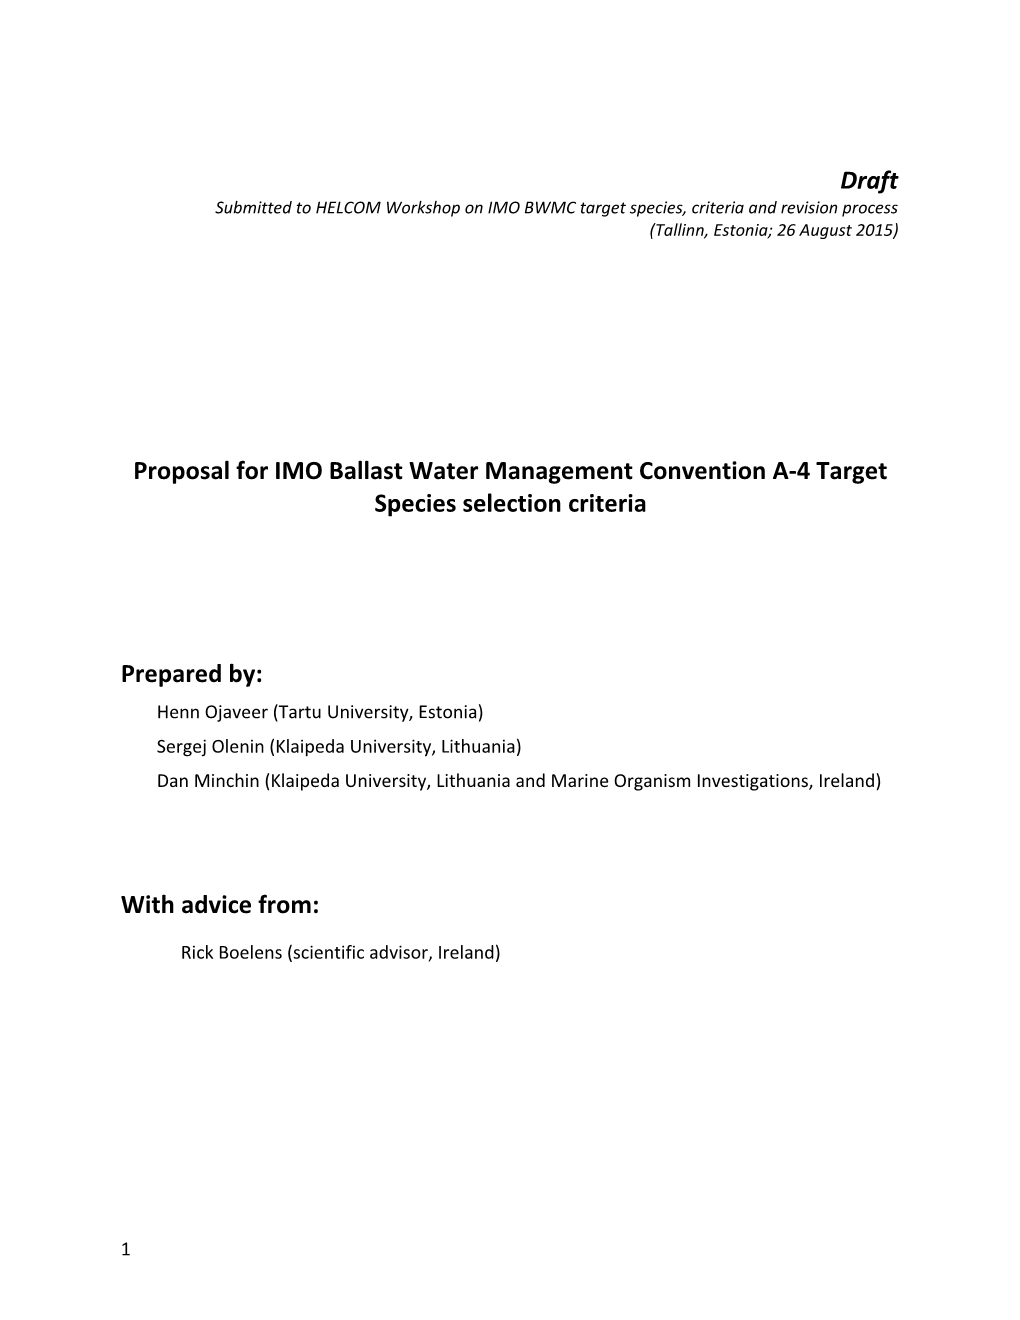 Document 1 Proposal for IMO Ballast Water Management Convention A-4 Target Species Selection